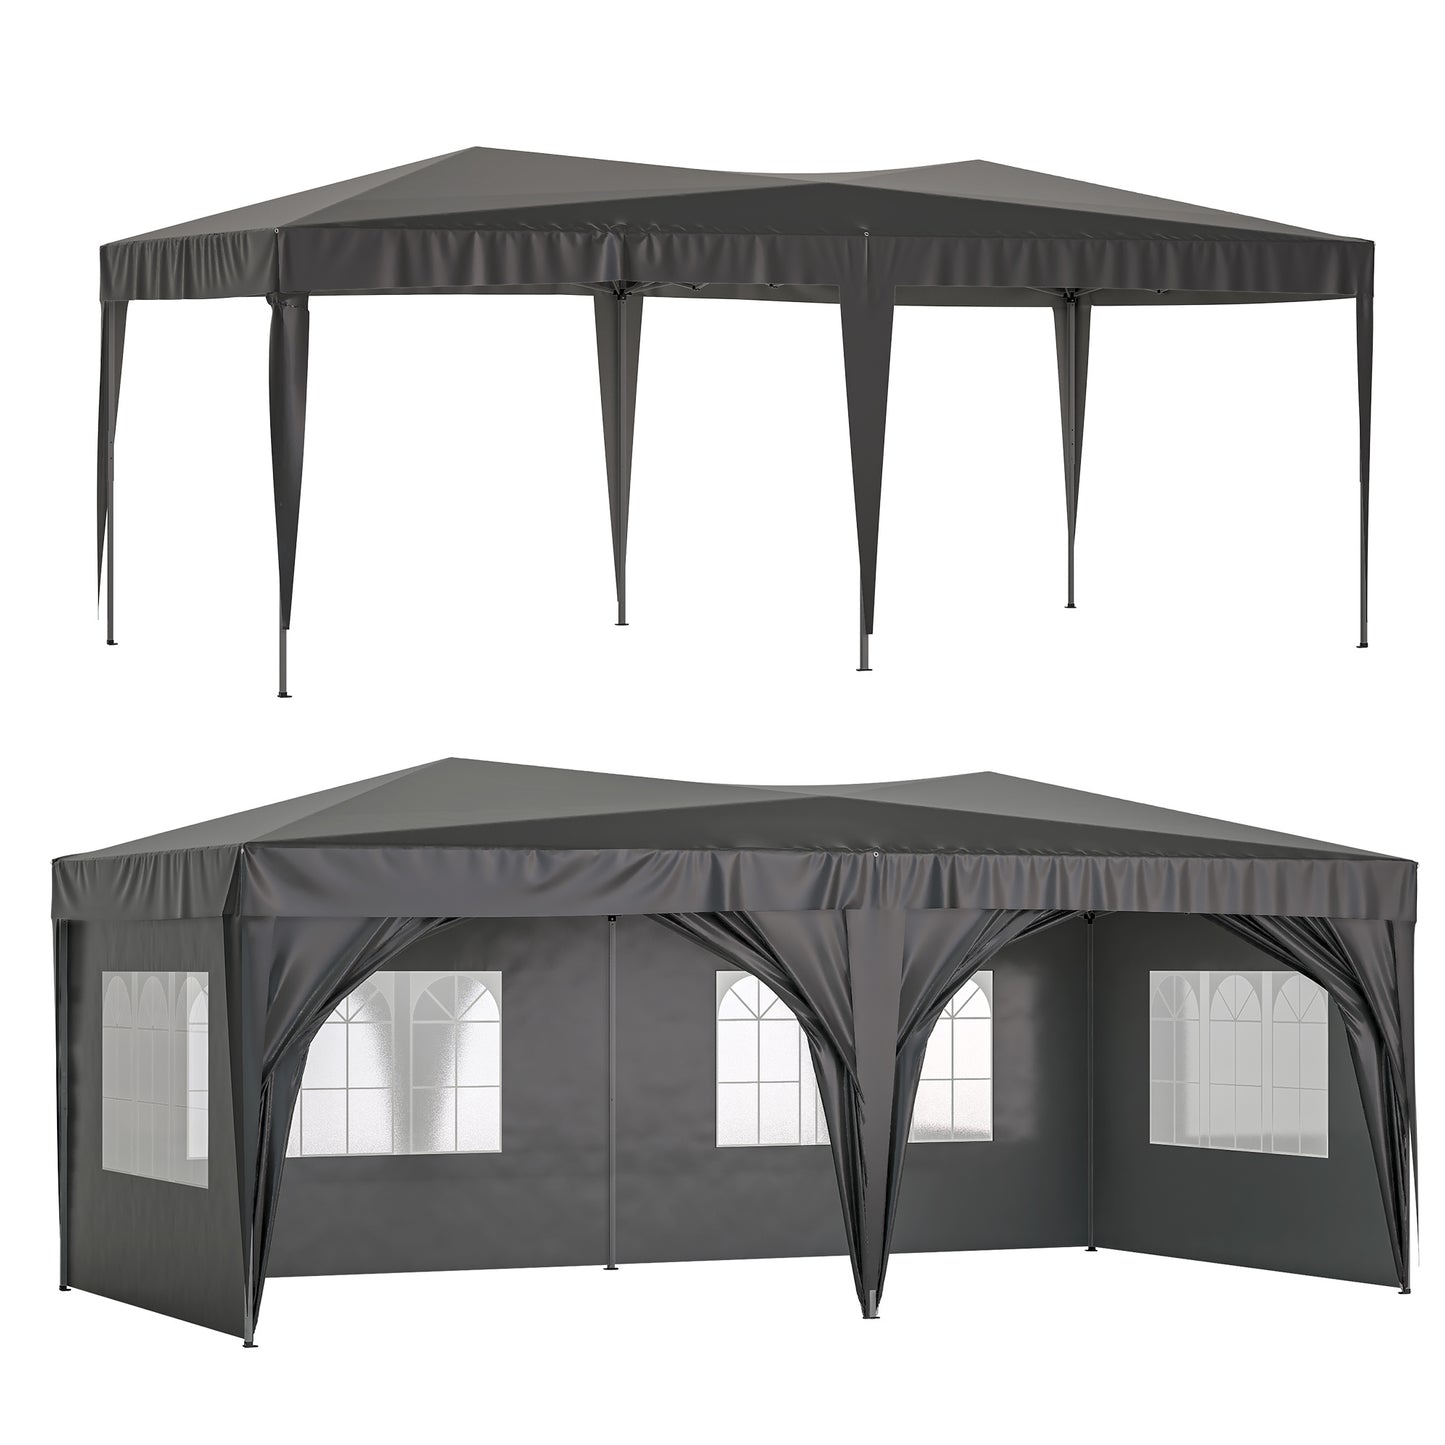 10 x 20 ft Heavy Duty Awning Canopy Pop Up Gazebo Marquee Party Wedding Event Tent with 6 Removable Sidewalls & Carry Bag